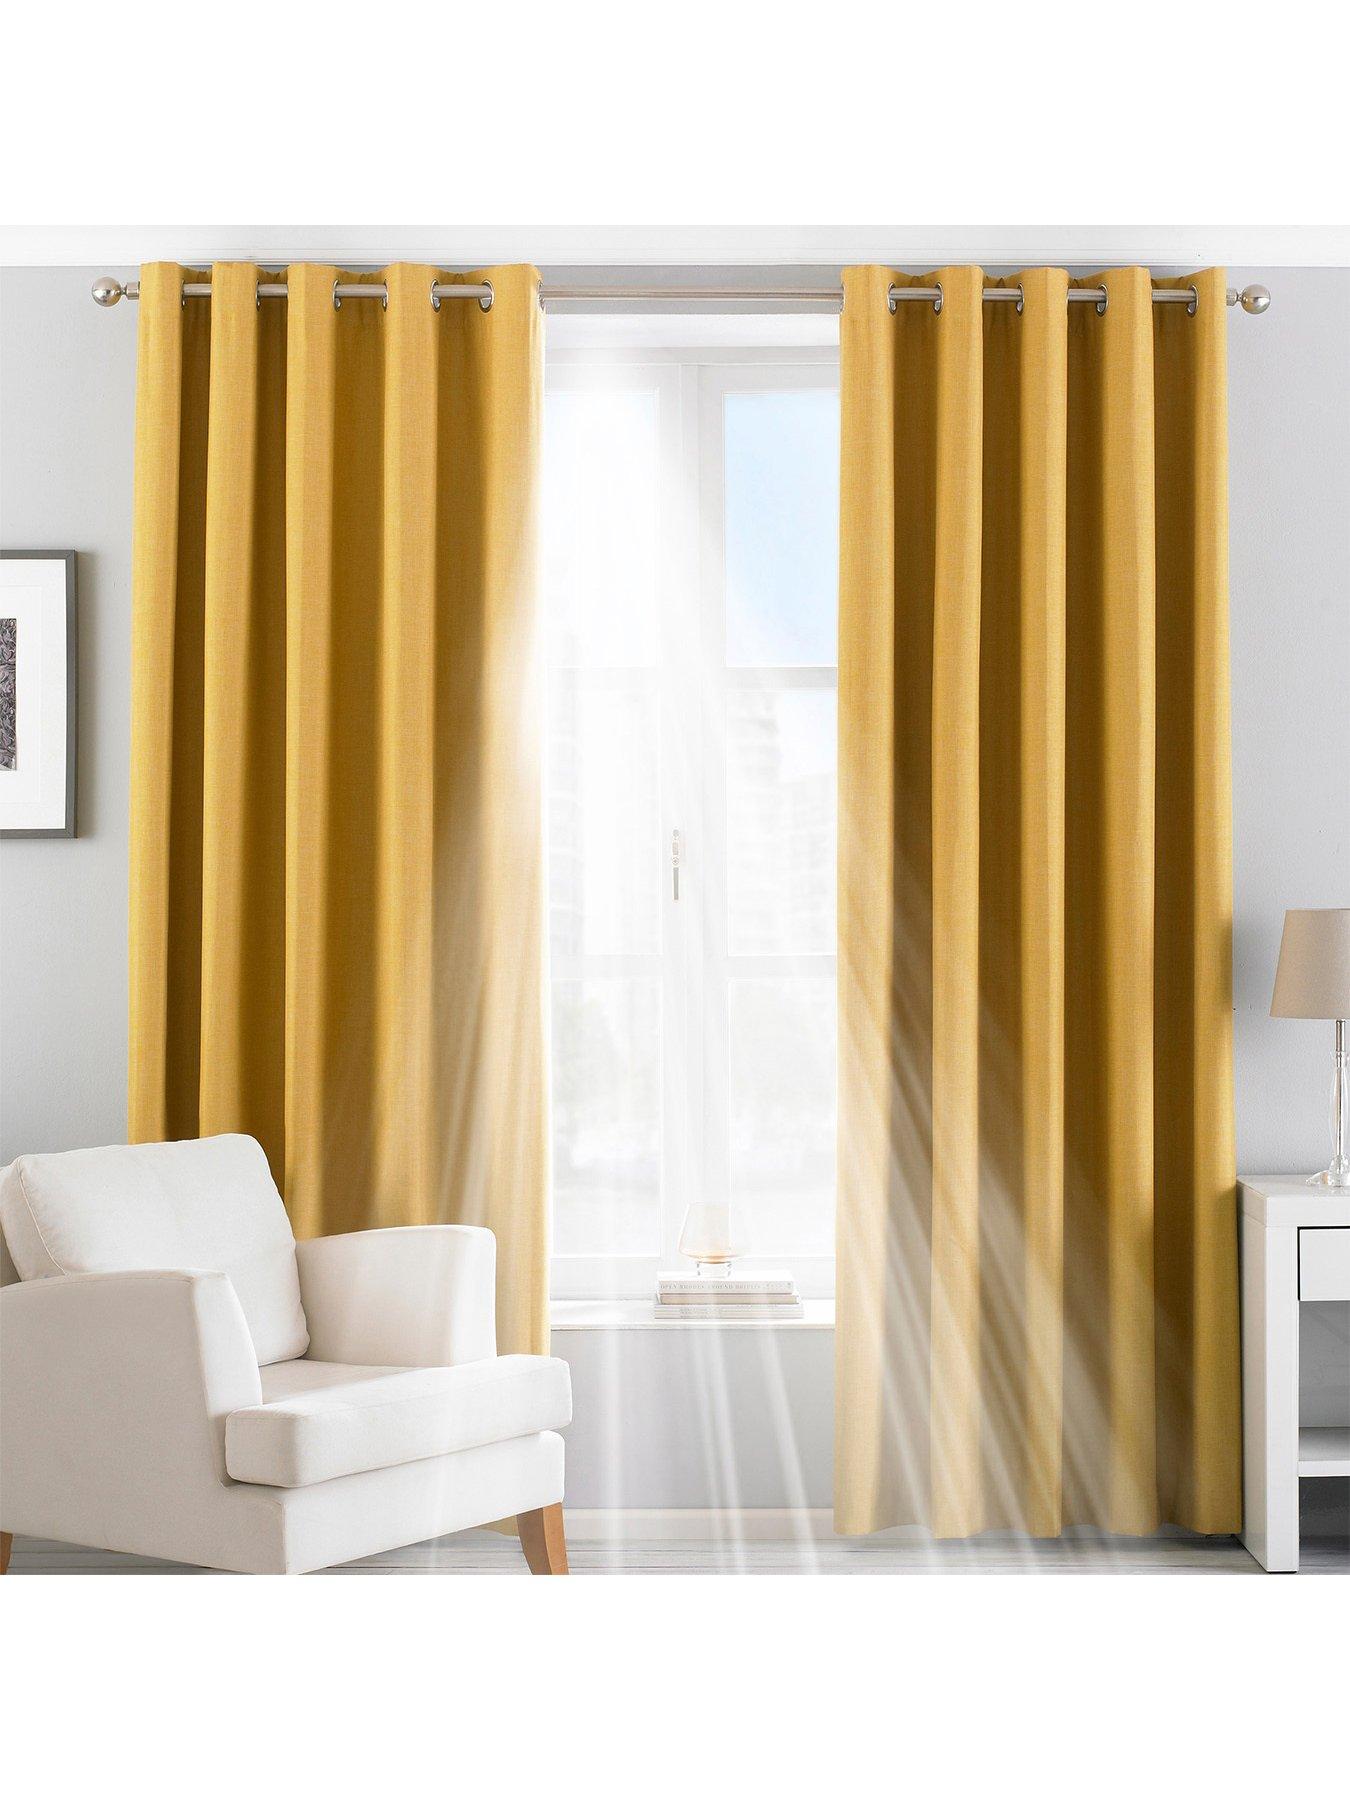 Details about   VERTICAL BLINDS Crown White 3.5" Window Treatment Shade 66"/78"/104"W x 84"L NEW 